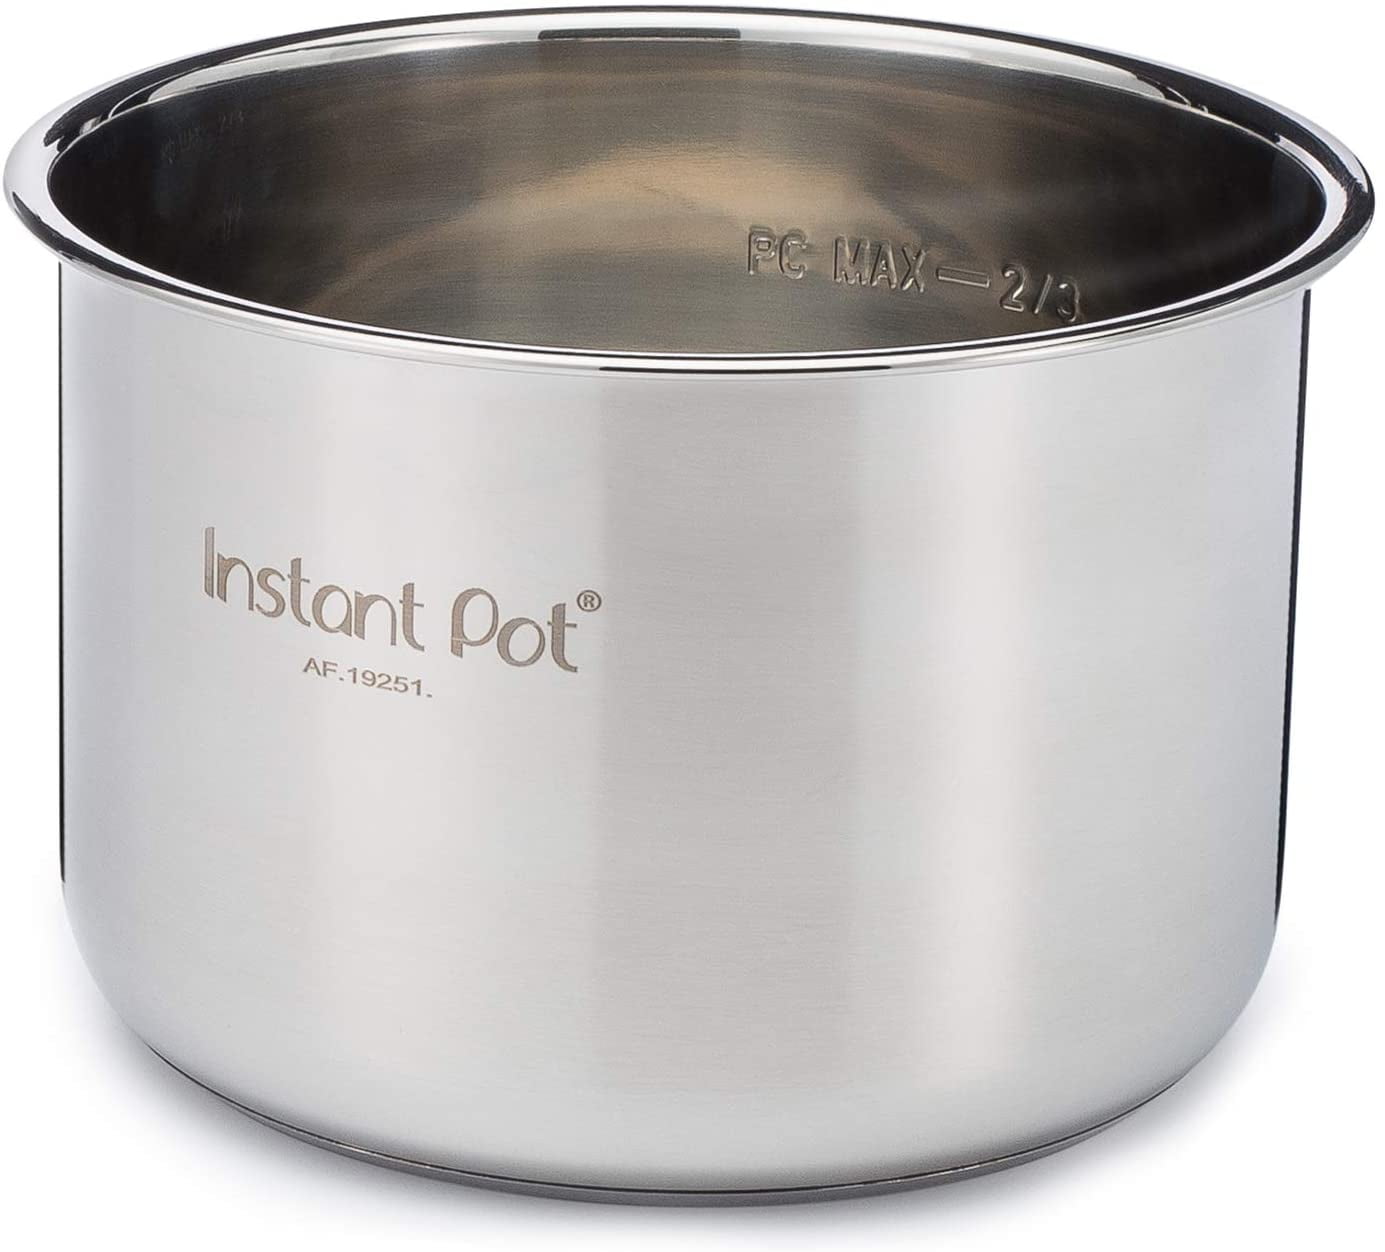 Instant Pot Stainless Steel Inner Cooking Pot with Handles – Use with 8 Quart Duo Evo, Pro, and Pro Crisp